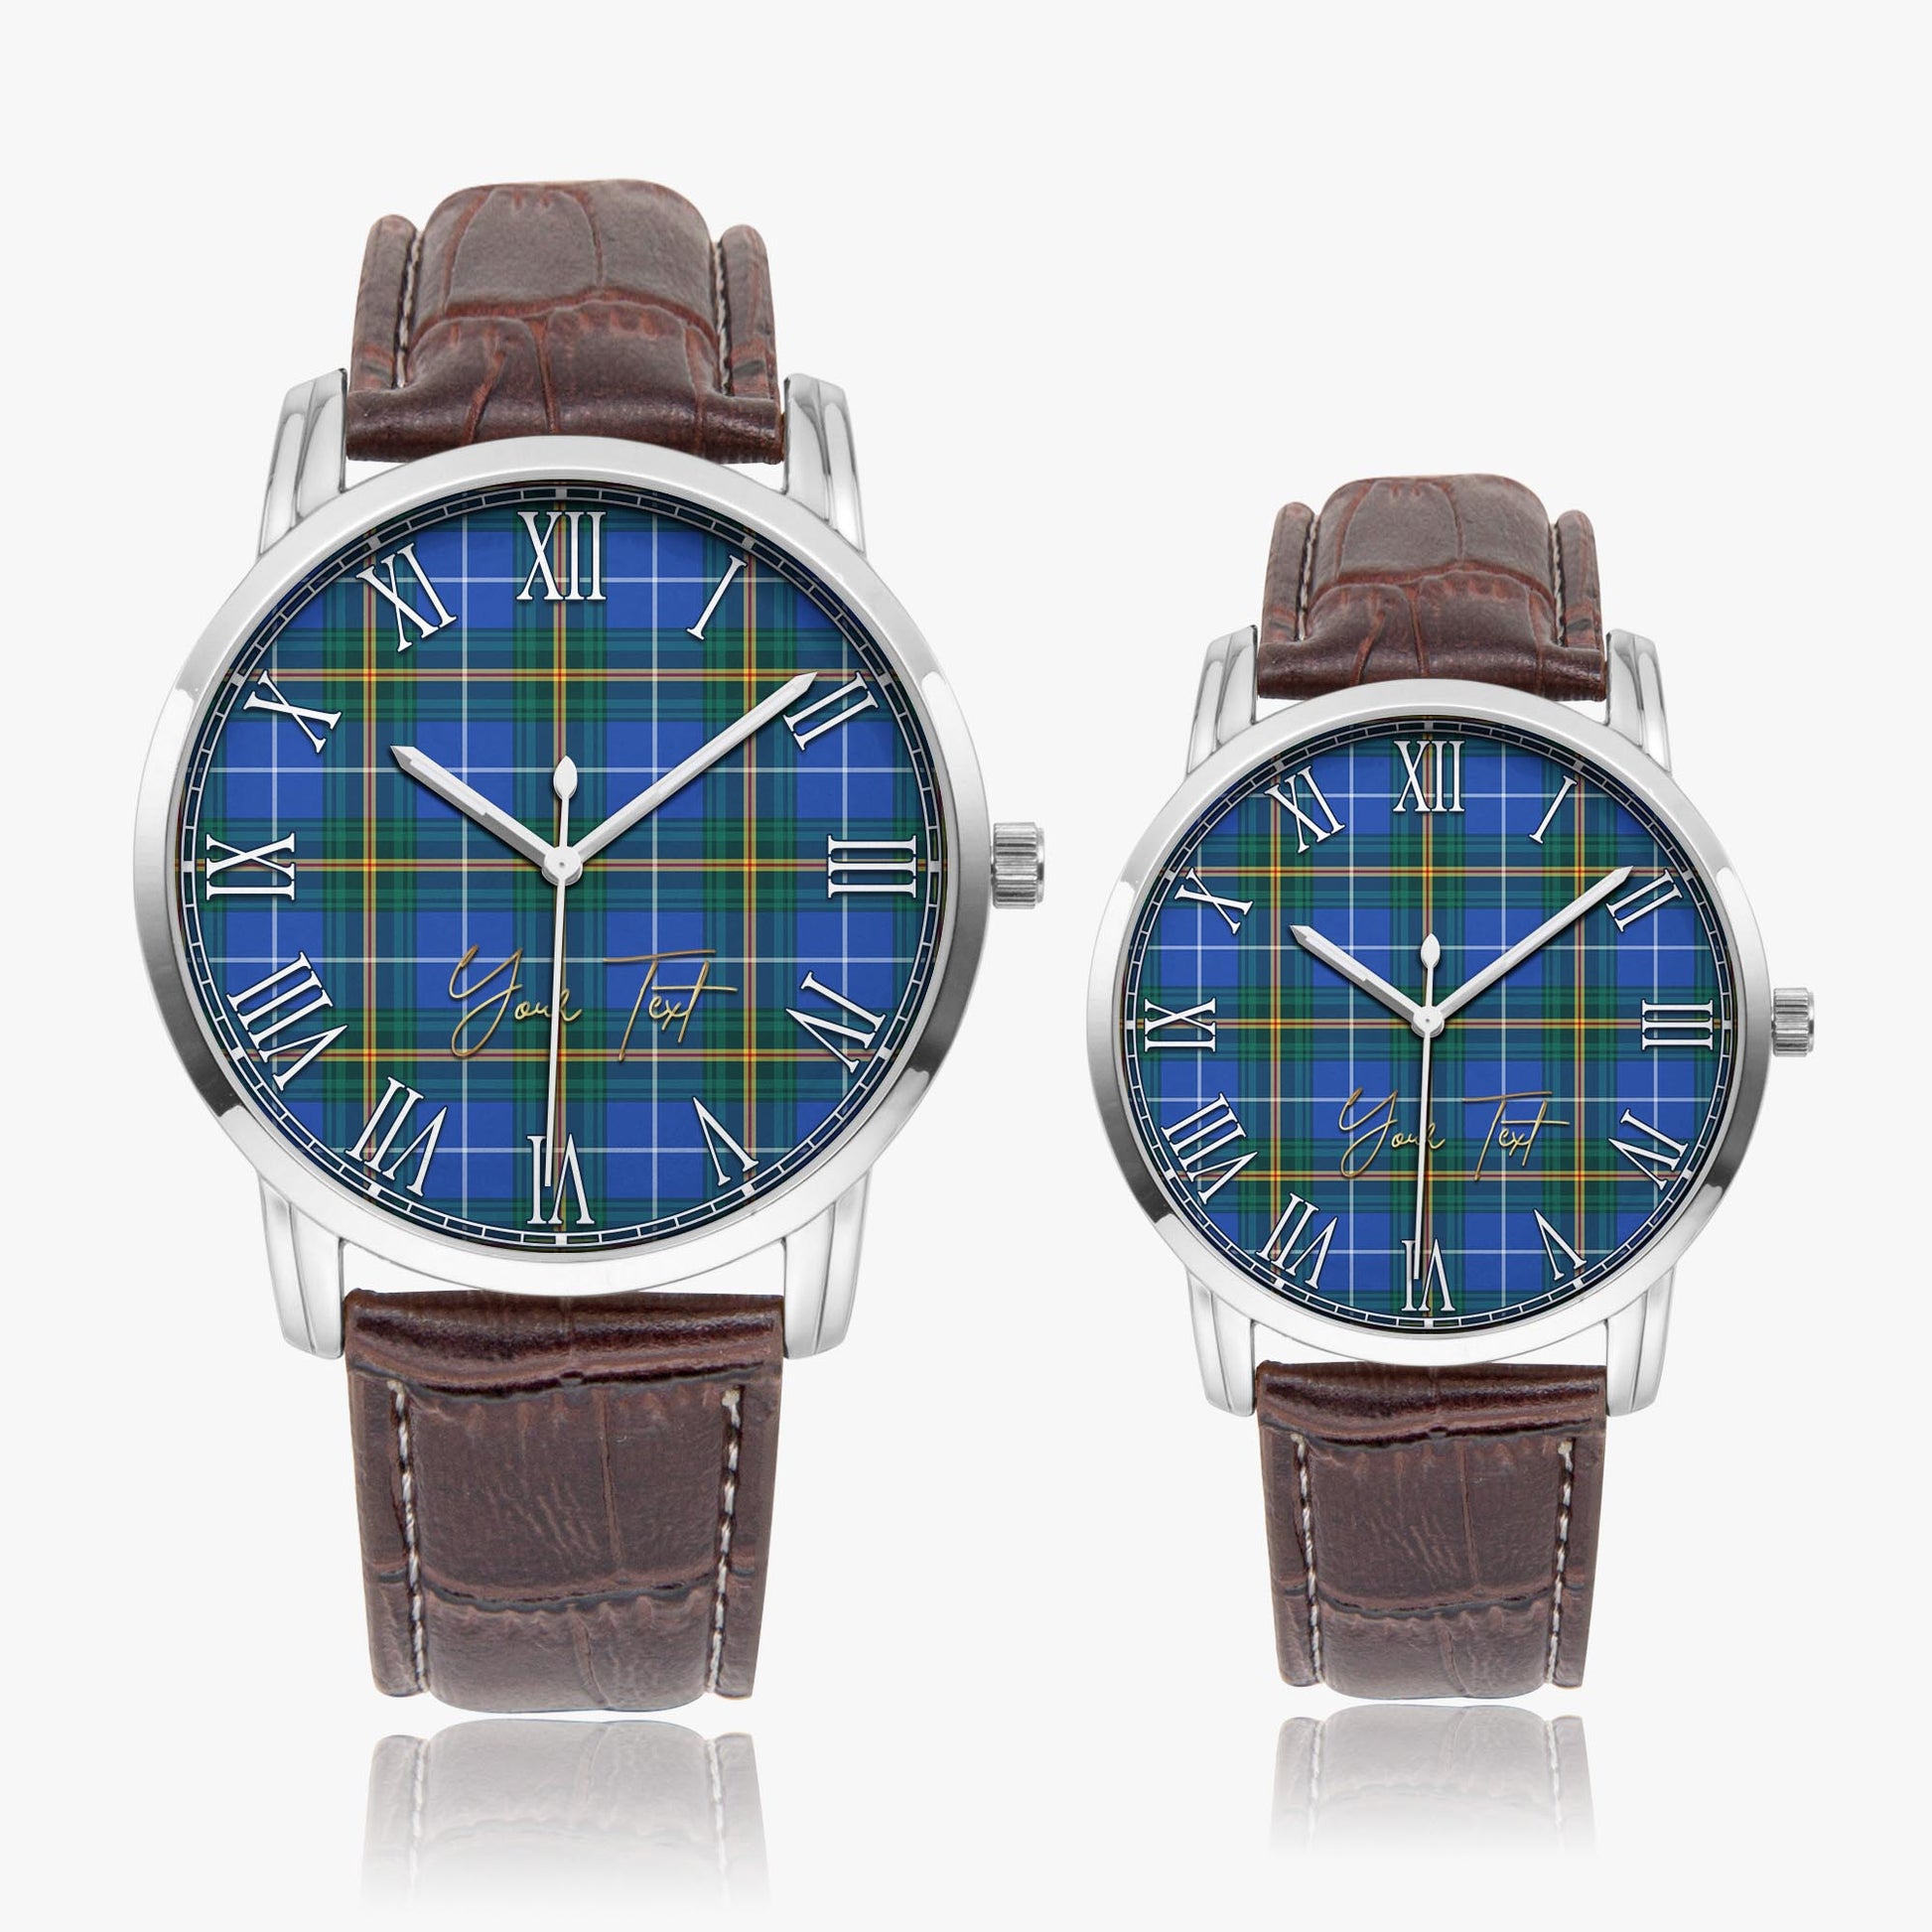 Nova Scotia Province Canada Tartan Personalized Your Text Leather Trap Quartz Watch Wide Type Silver Case With Brown Leather Strap - Tartanvibesclothing